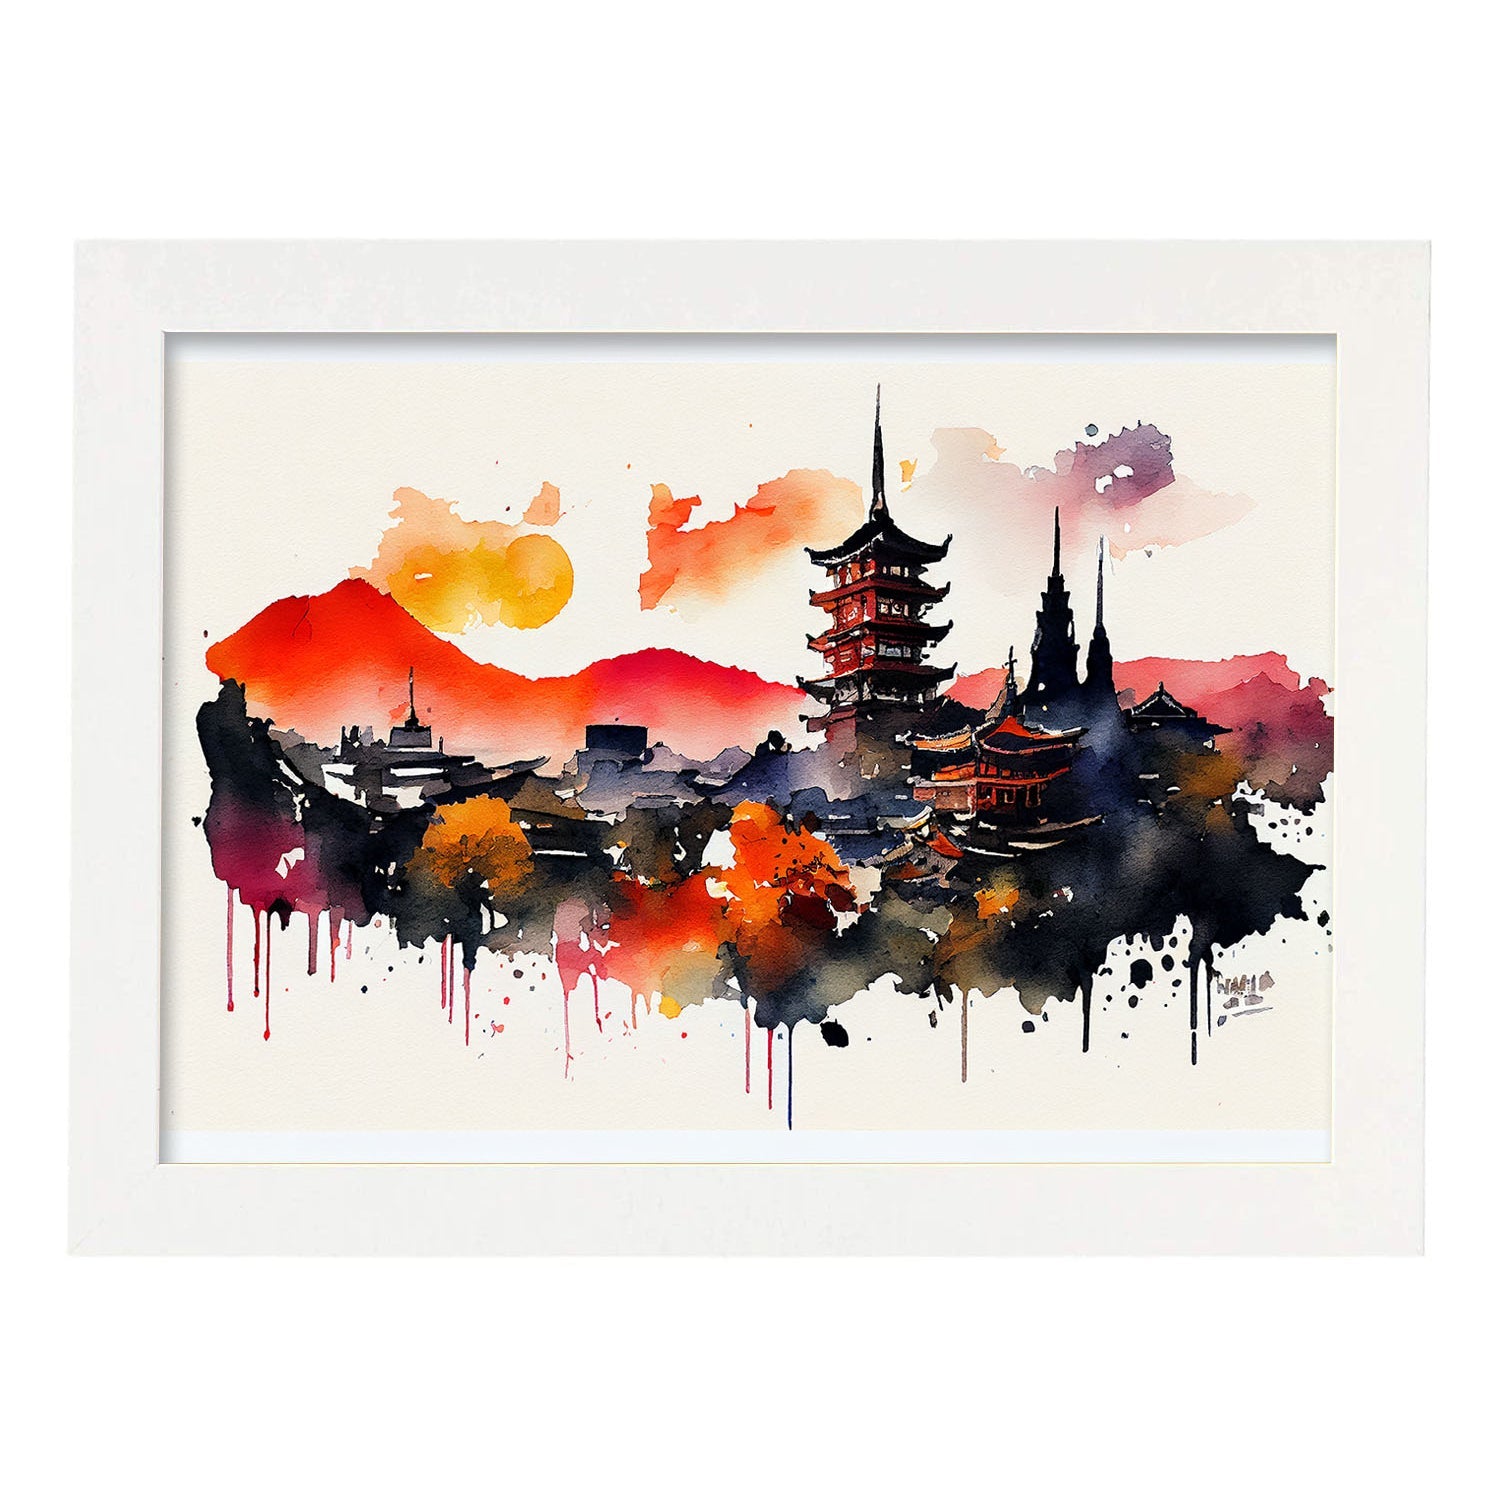 Nacnic watercolor of a skyline of the city of Kyoto_2. Aesthetic Wall Art Prints for Bedroom or Living Room Design.-Artwork-Nacnic-A4-Marco Blanco-Nacnic Estudio SL